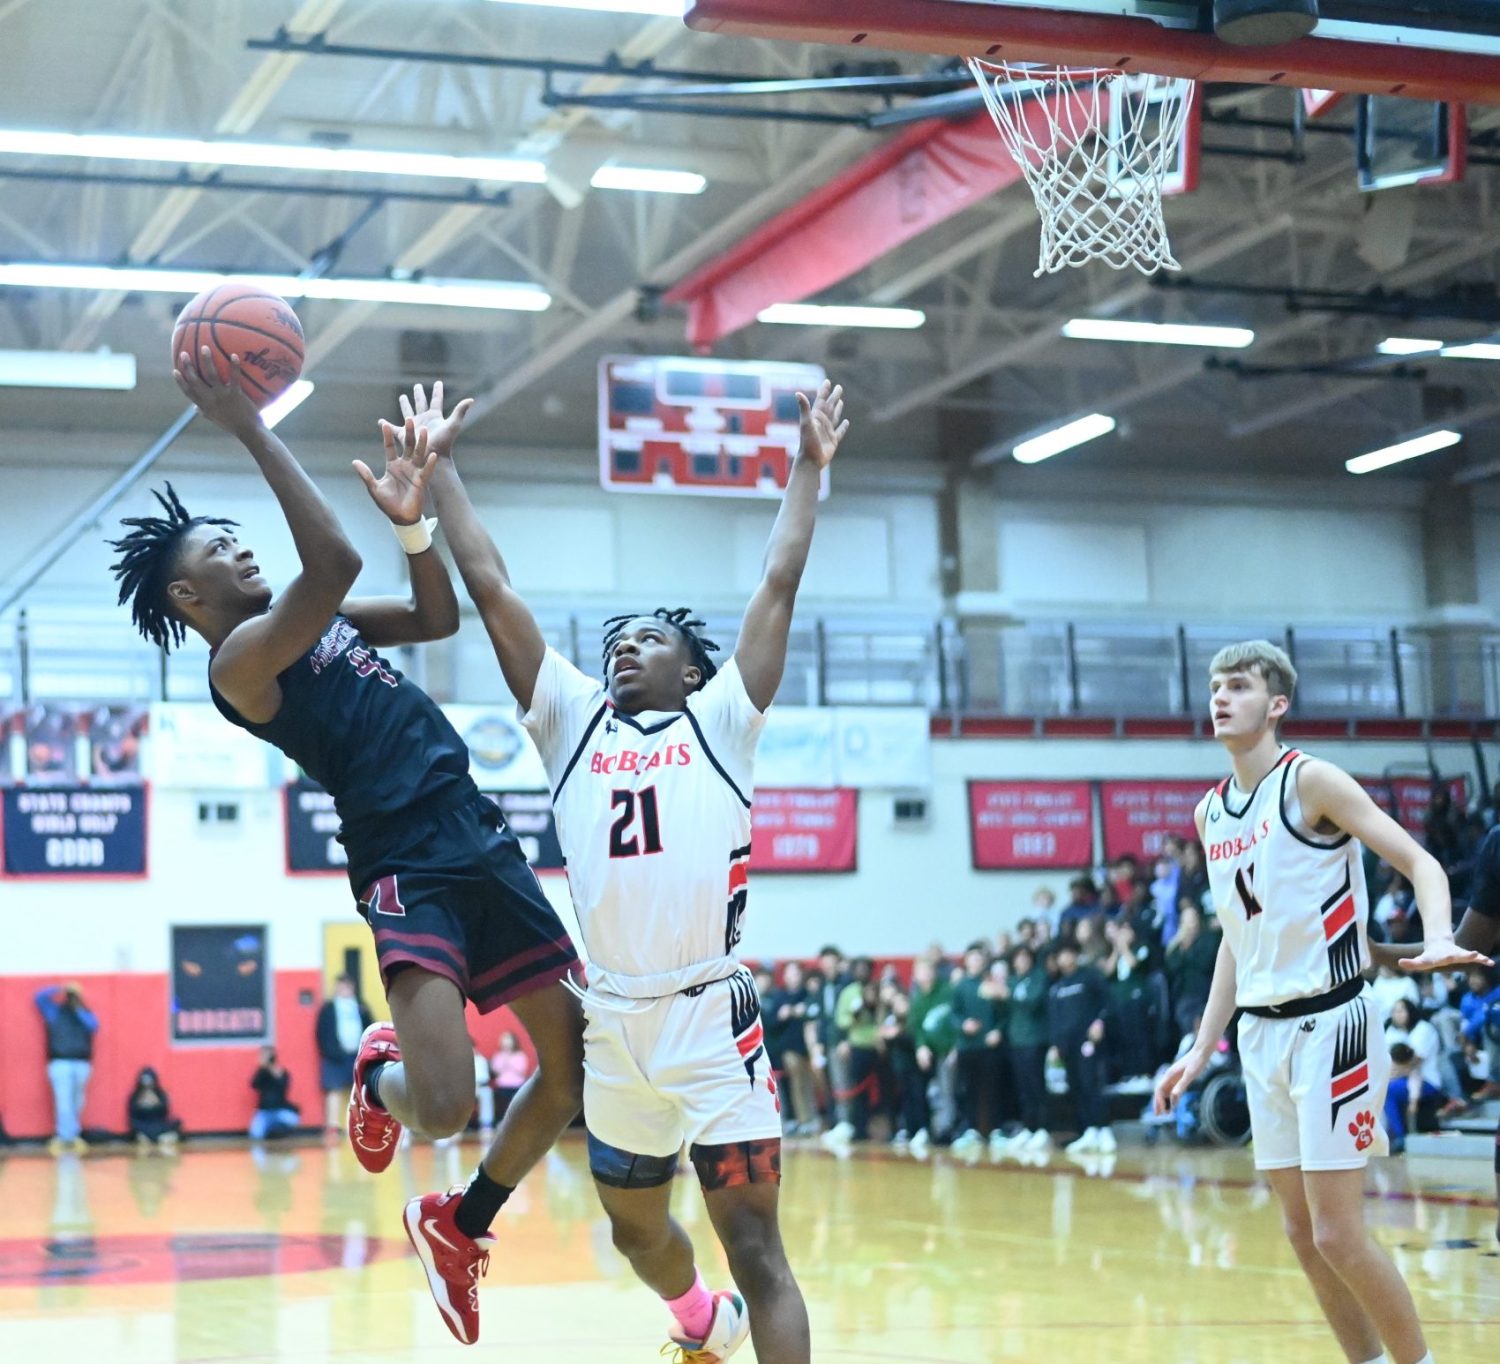 Muskegon Big Reds fall to Grand Blanc in Saturday hoops action